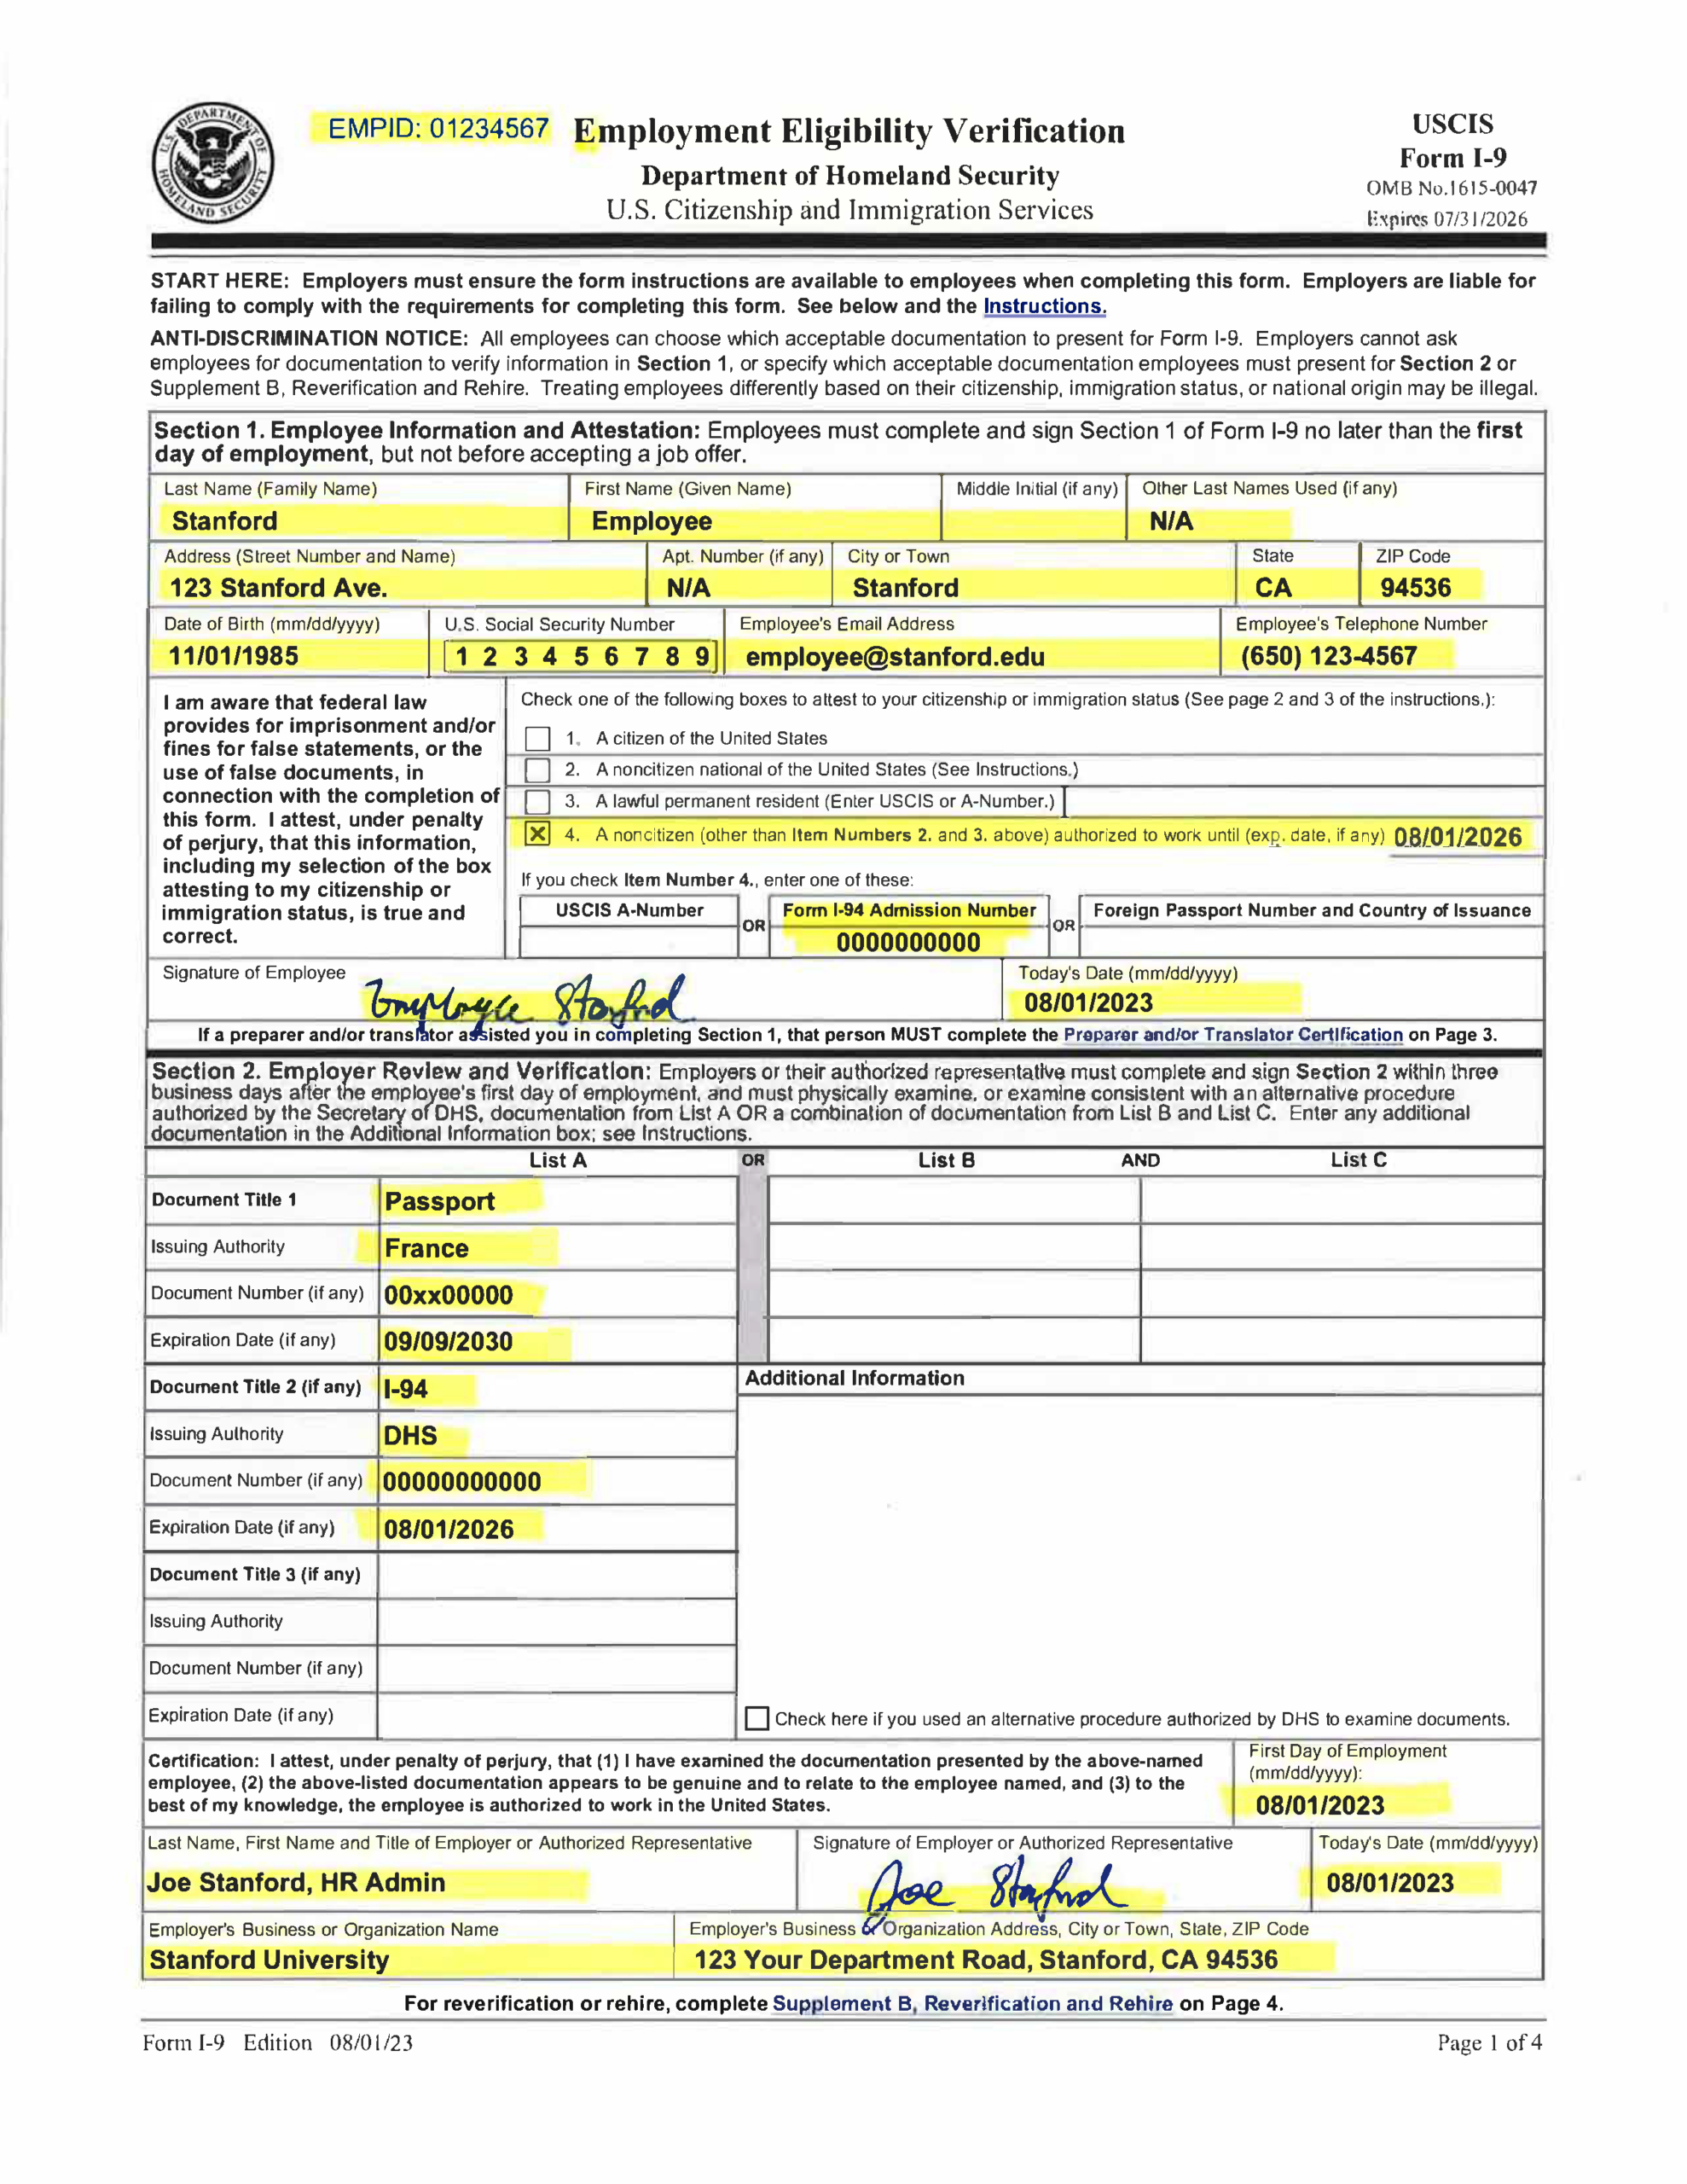 Examples Of Completed Form I-9 For Stanford inside USCIS I 9 Form 2024